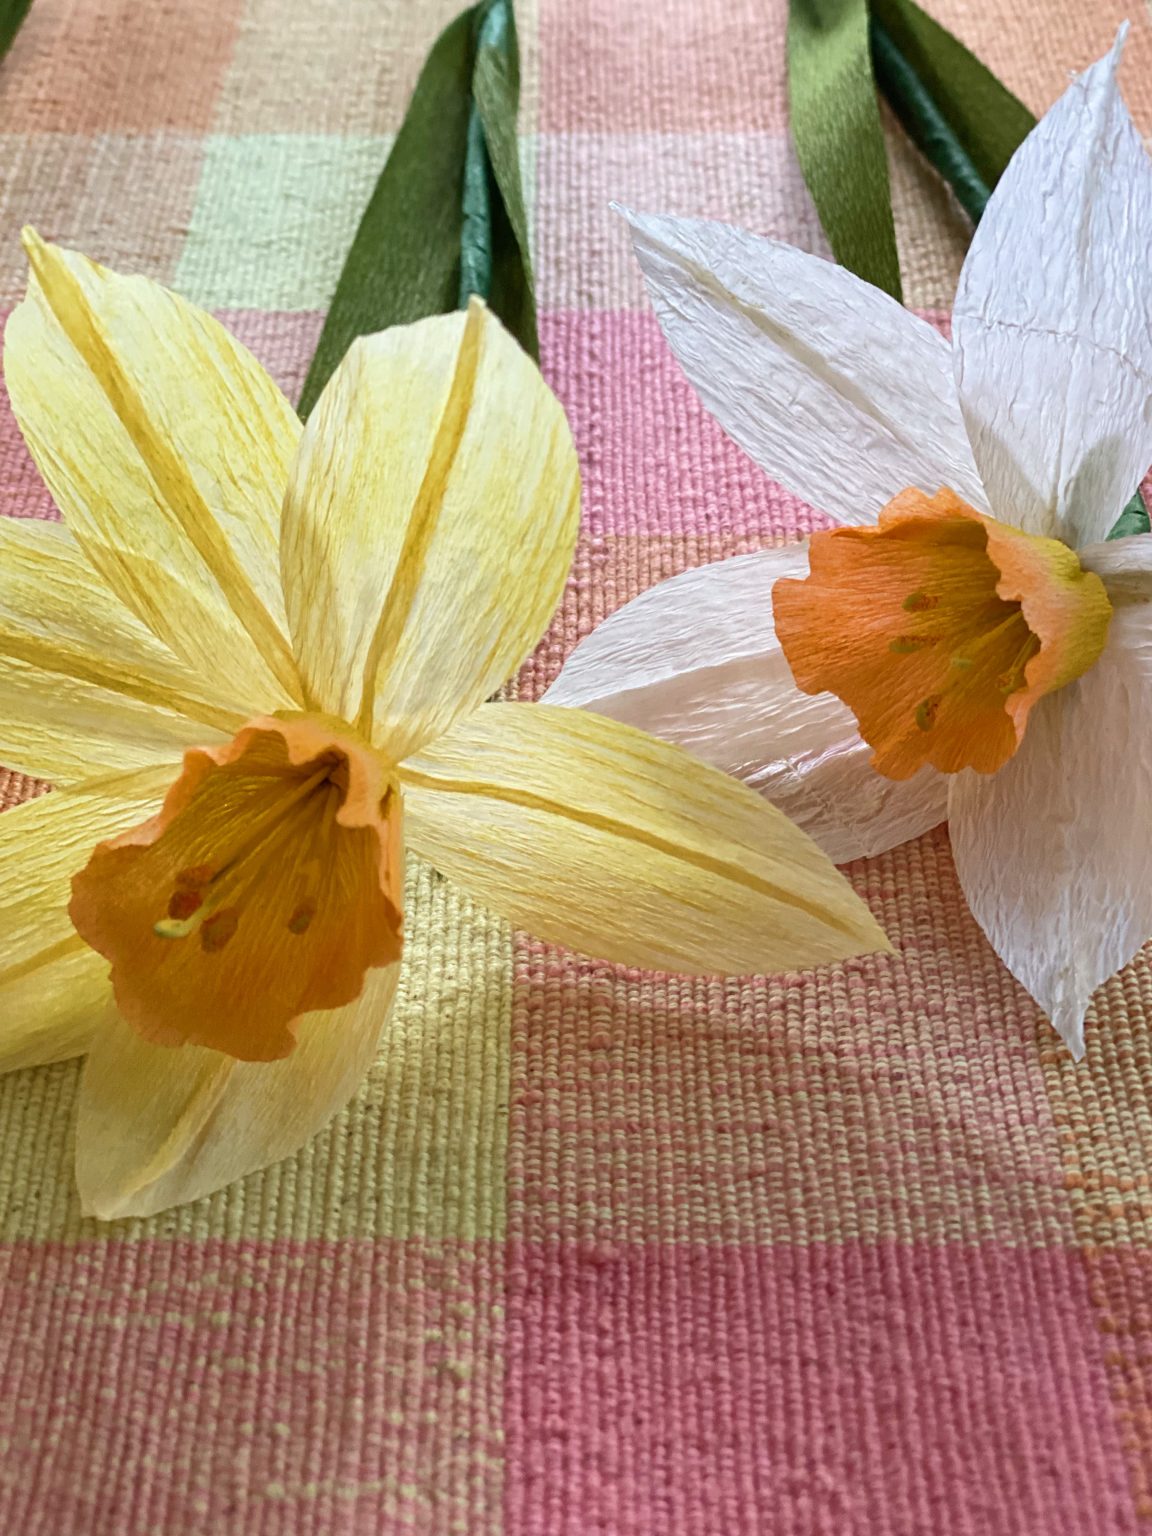 How to Make Easy Paper Daffodils Flowers - MY 100 YEAR OLD HOME